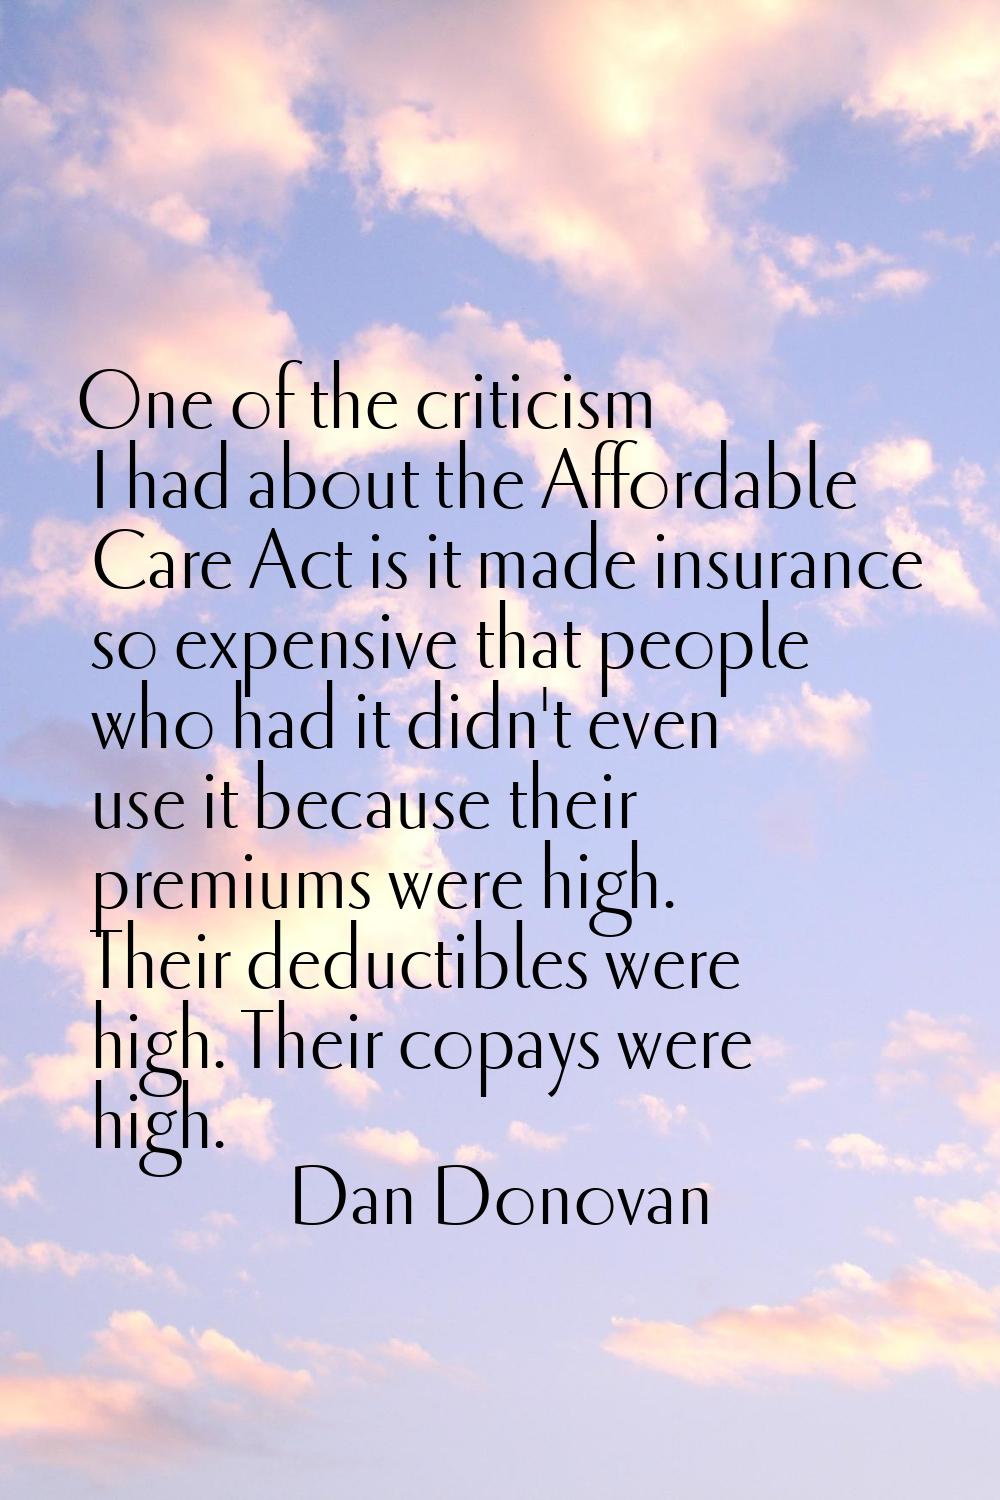 One of the criticism I had about the Affordable Care Act is it made insurance so expensive that peo